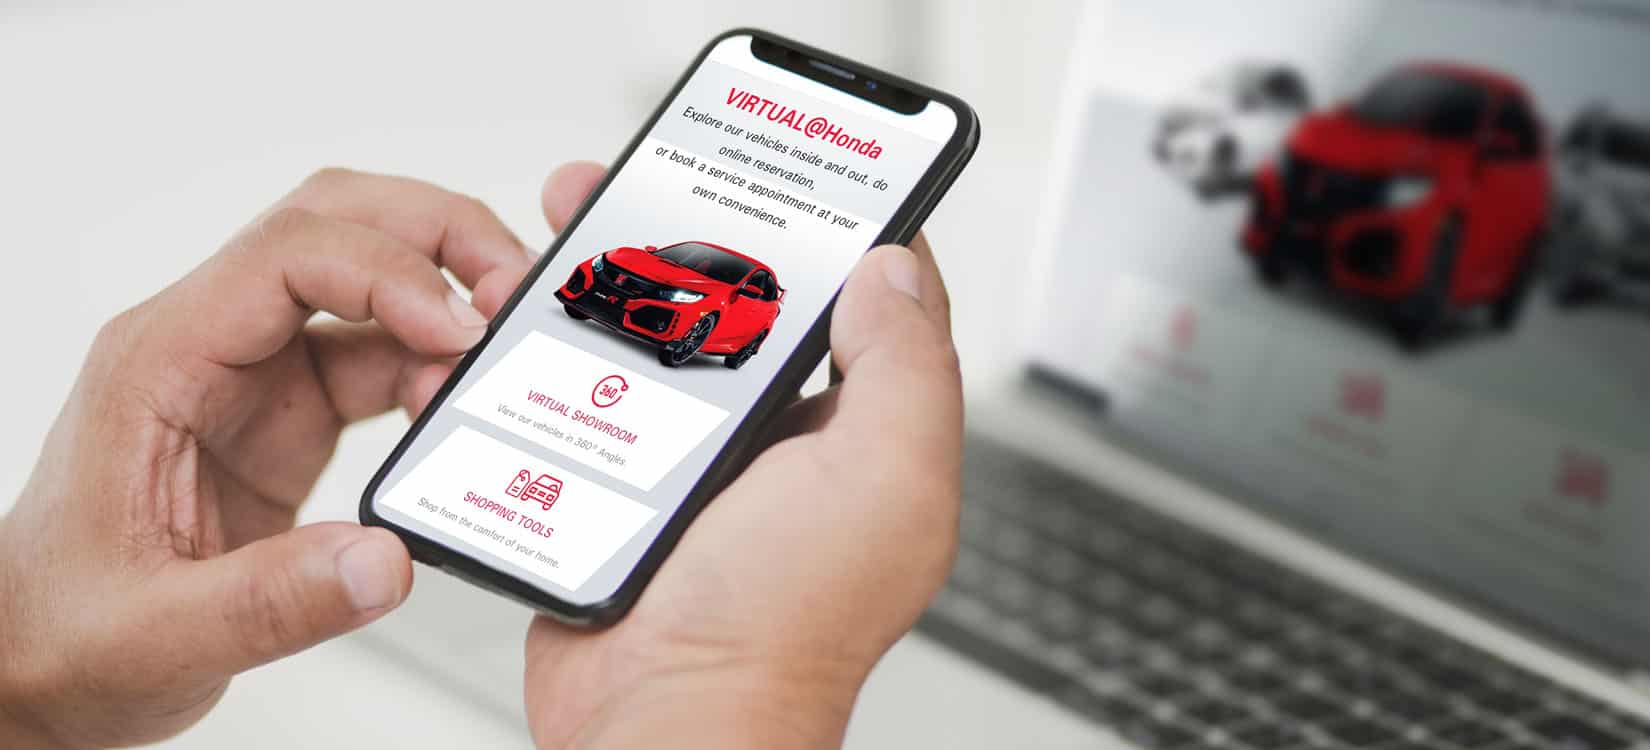 Honda Officially Launches its Virtual Dealership